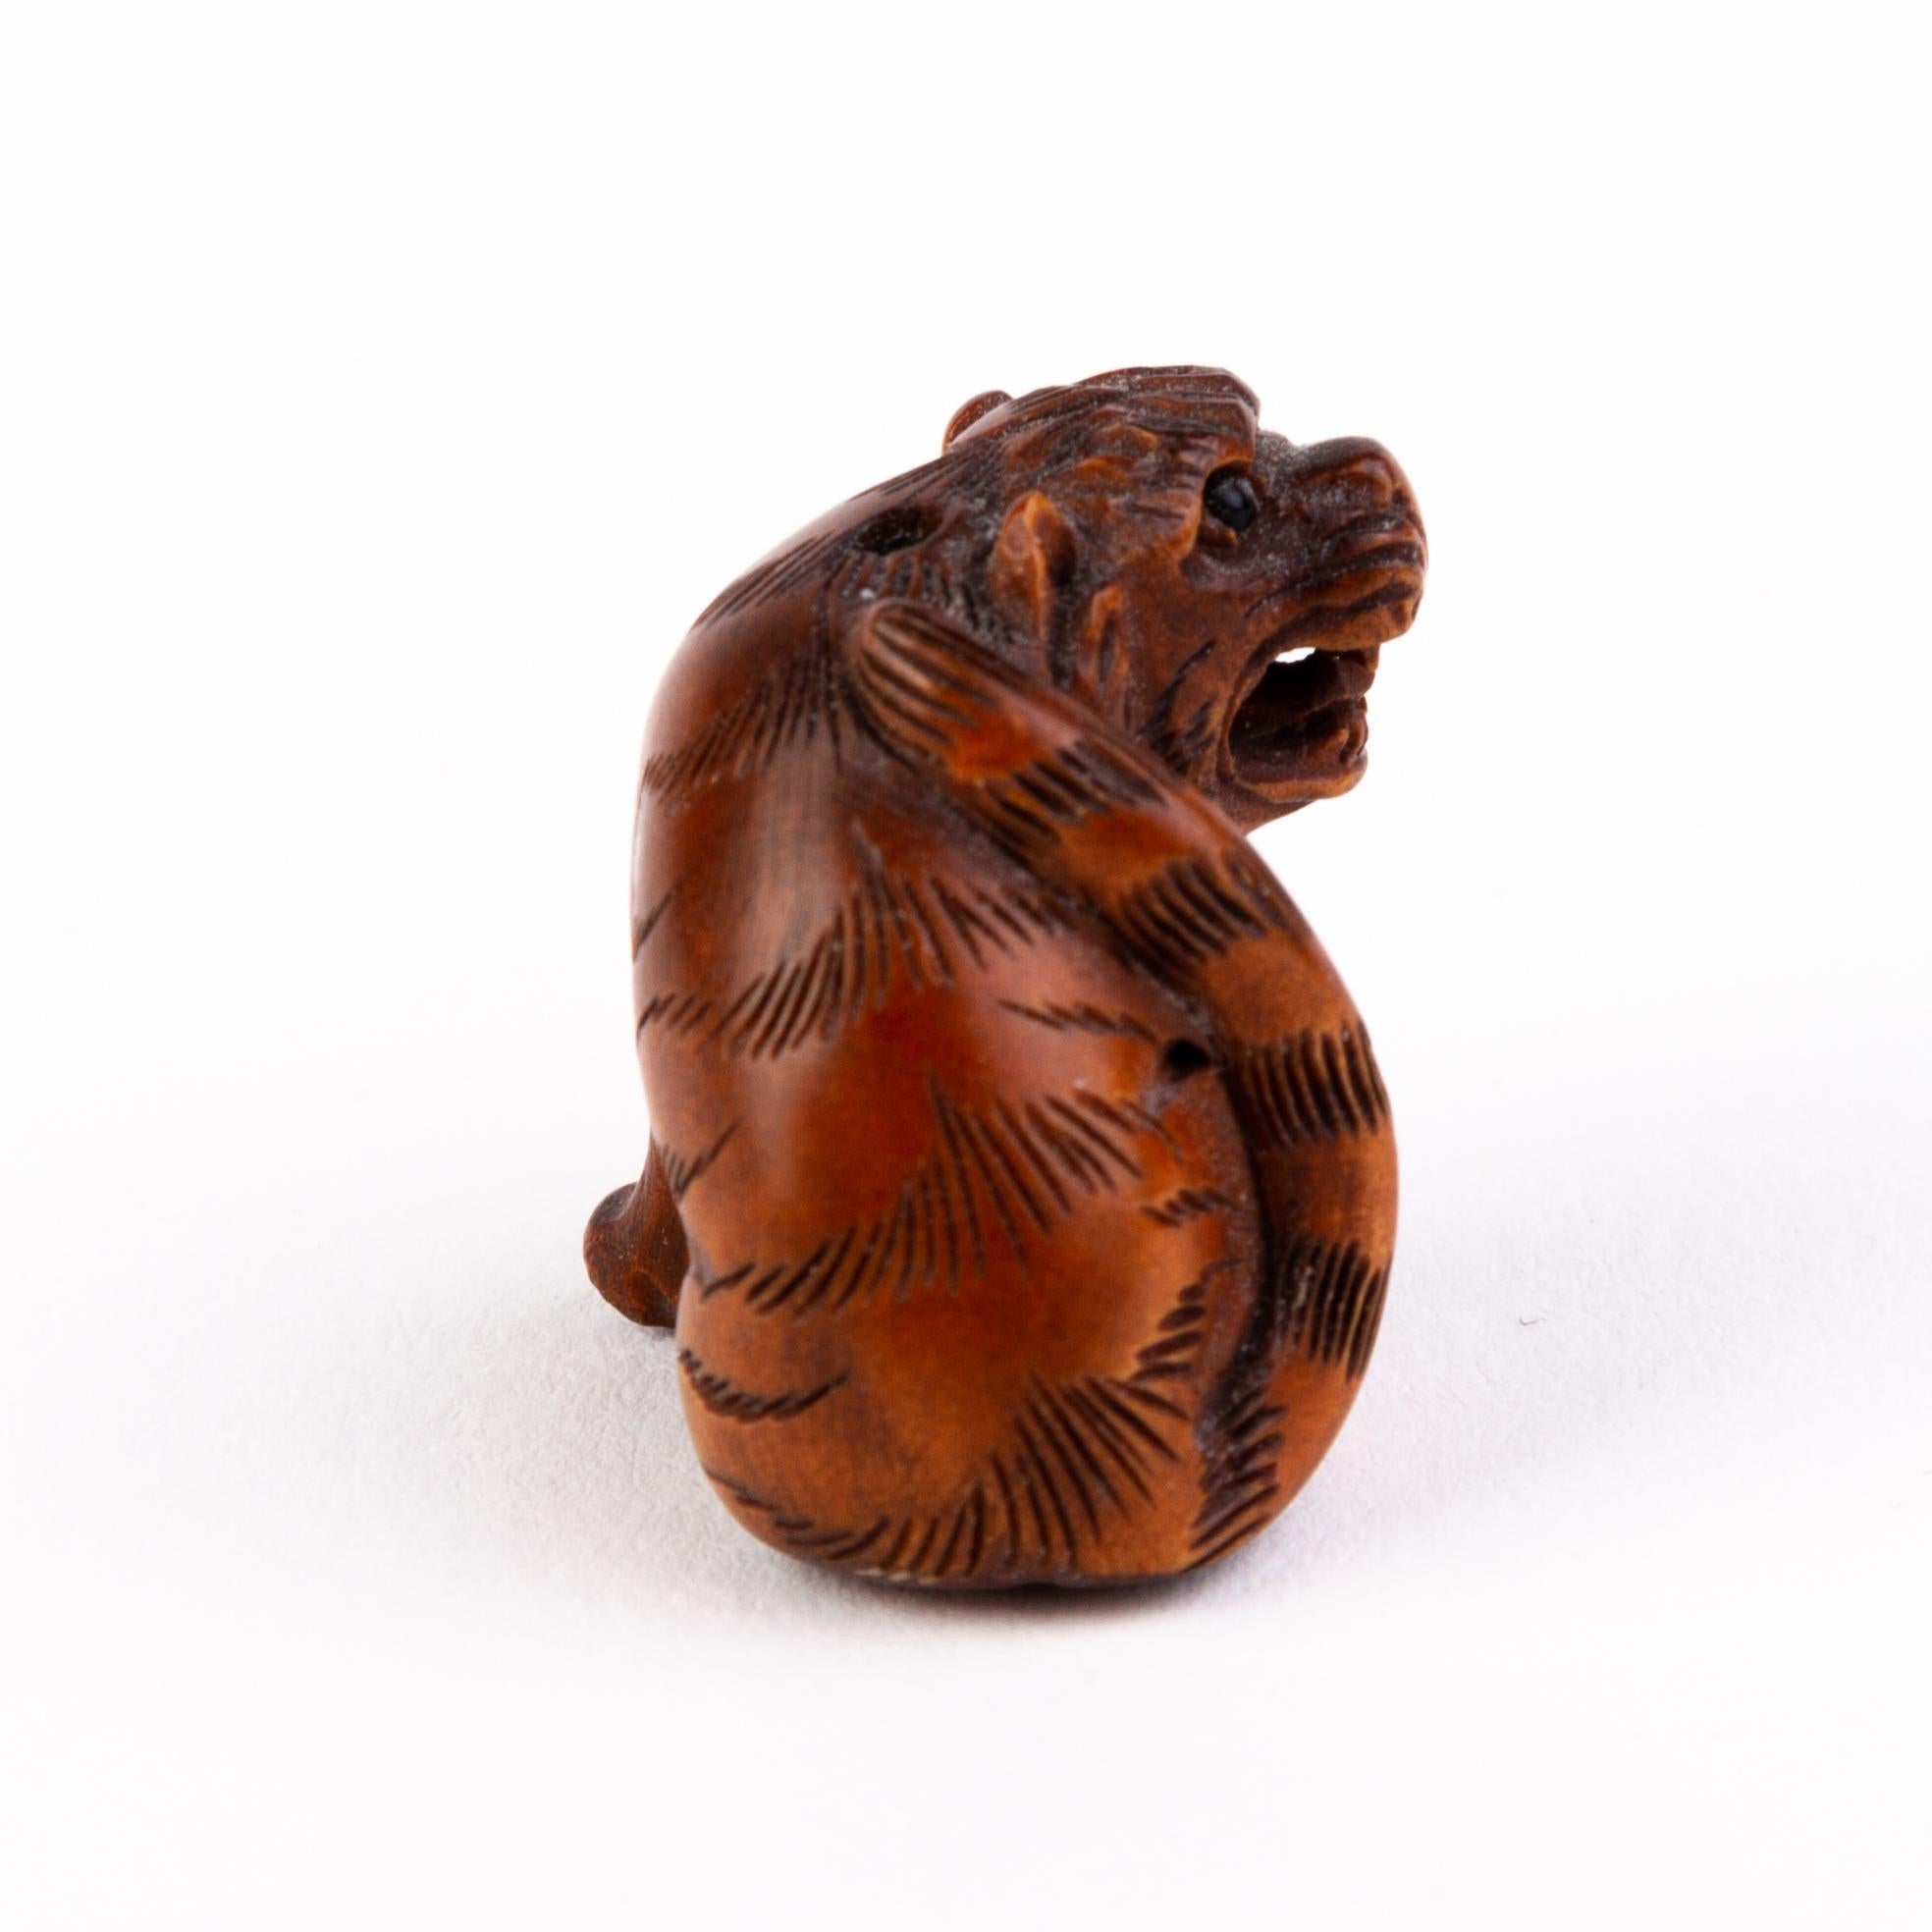 In good condition
From a private collection
Free international shipping
Japanese Carved Wood Netsuke Inro Tiger